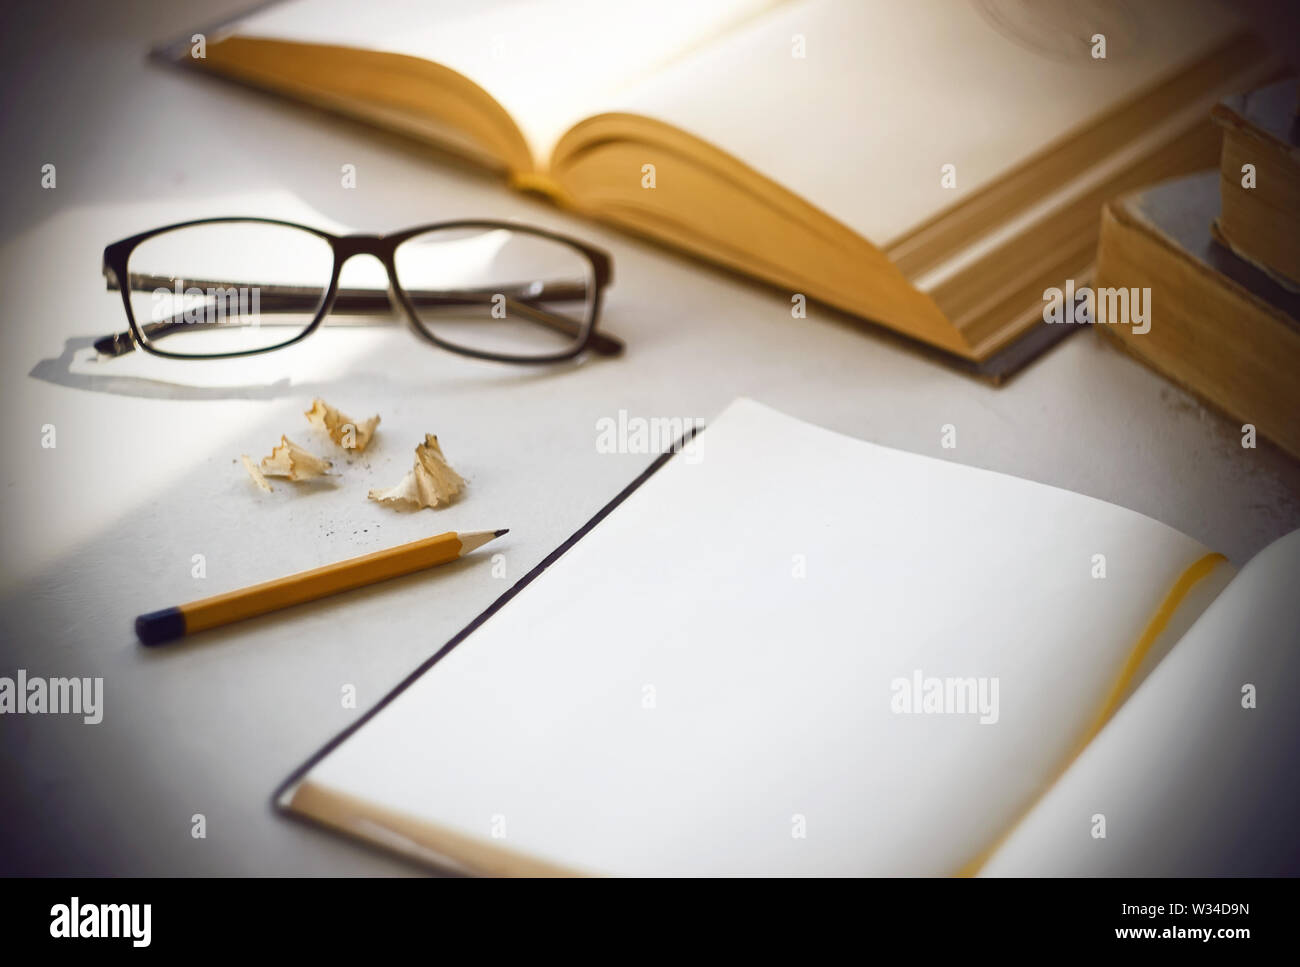 Bright workplace scientist - old shabby books, a diary with a bookmark, glasses in black, yellow pencil and shavings from his sharpening. Stock Photo